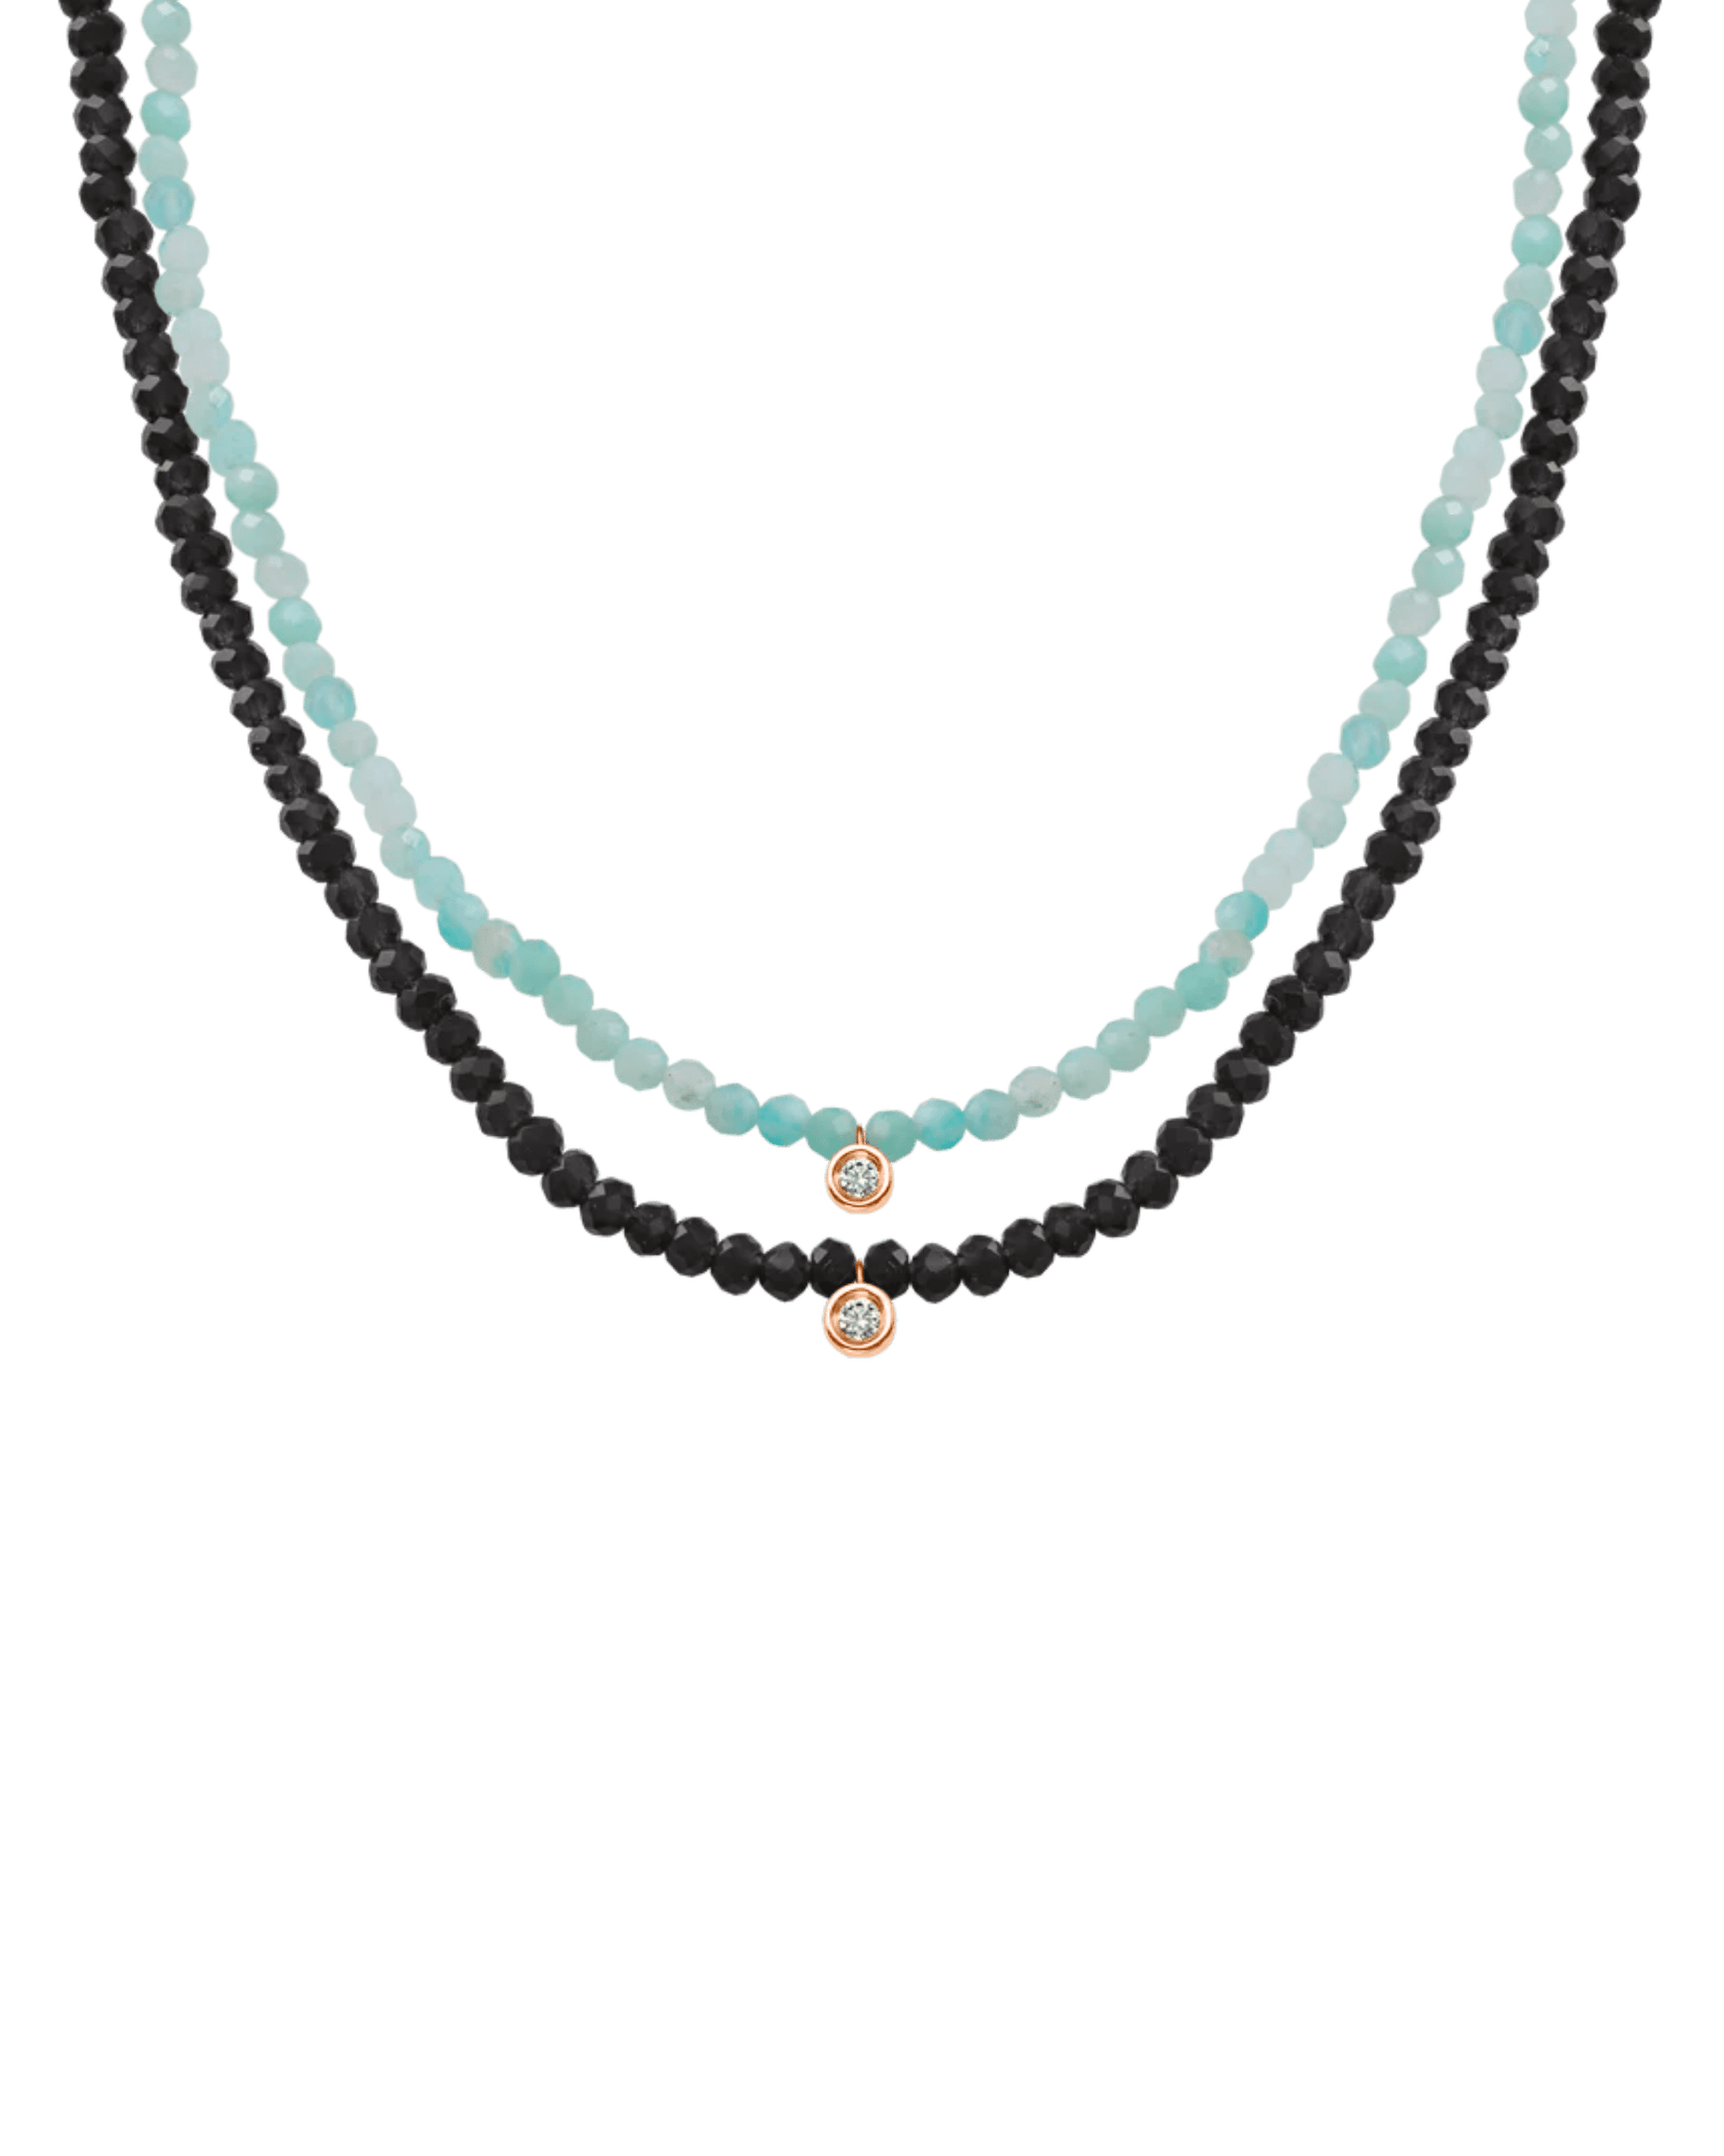 Set of Gemstone & Diamond Necklaces - 14K Yellow Gold Necklaces magal-dev 